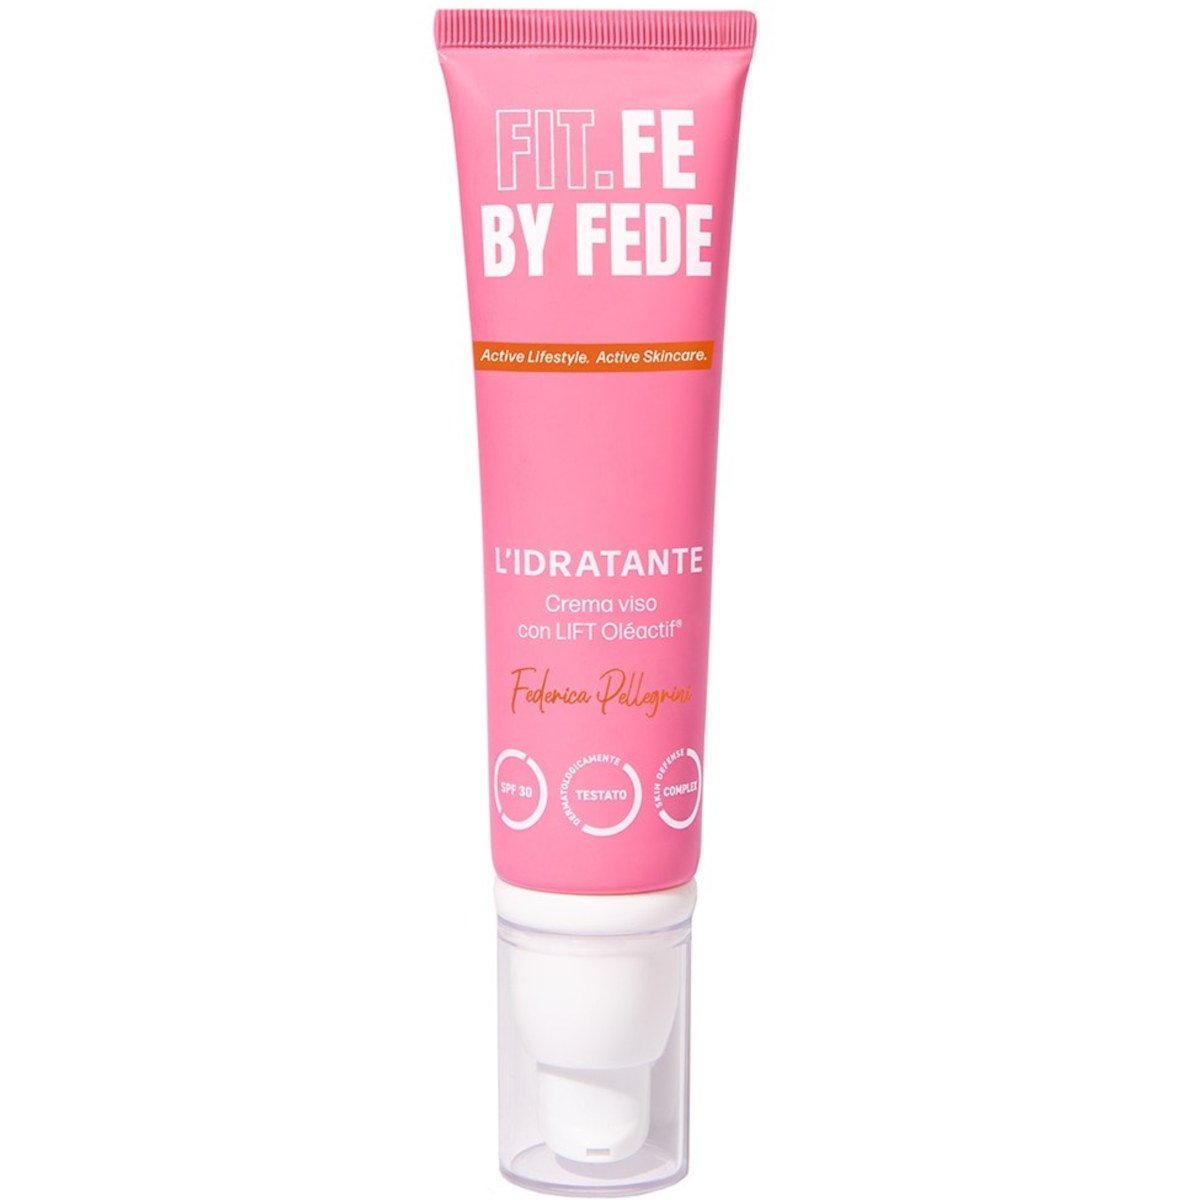 Fit.Fe by Fede crema viso